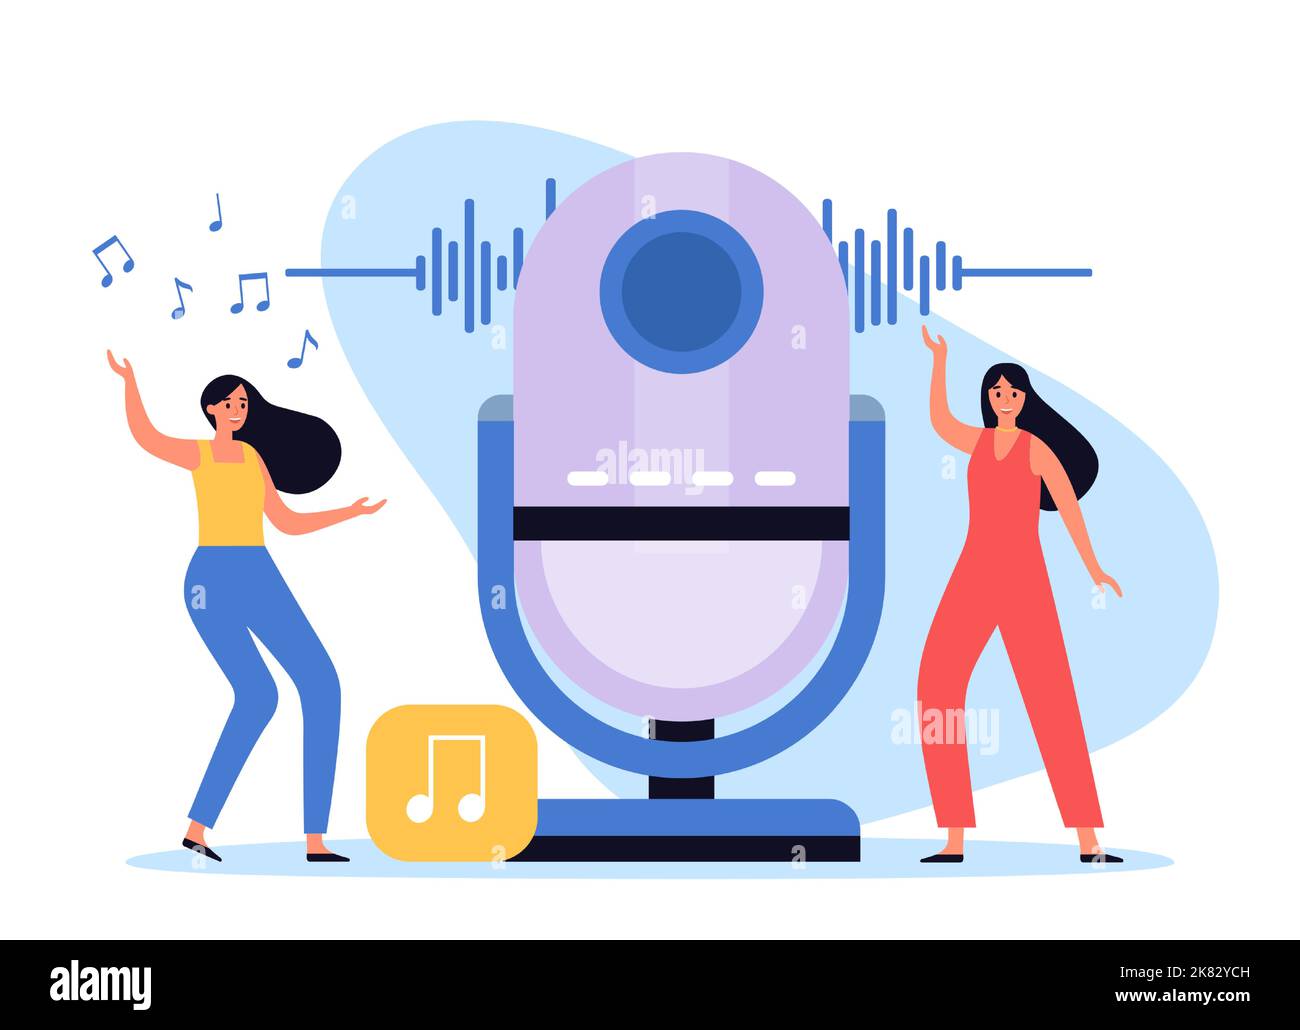 Interactive smart speaker content. Little female characters dancing near device. Cartoon voice command assistant playing music Stock Vector